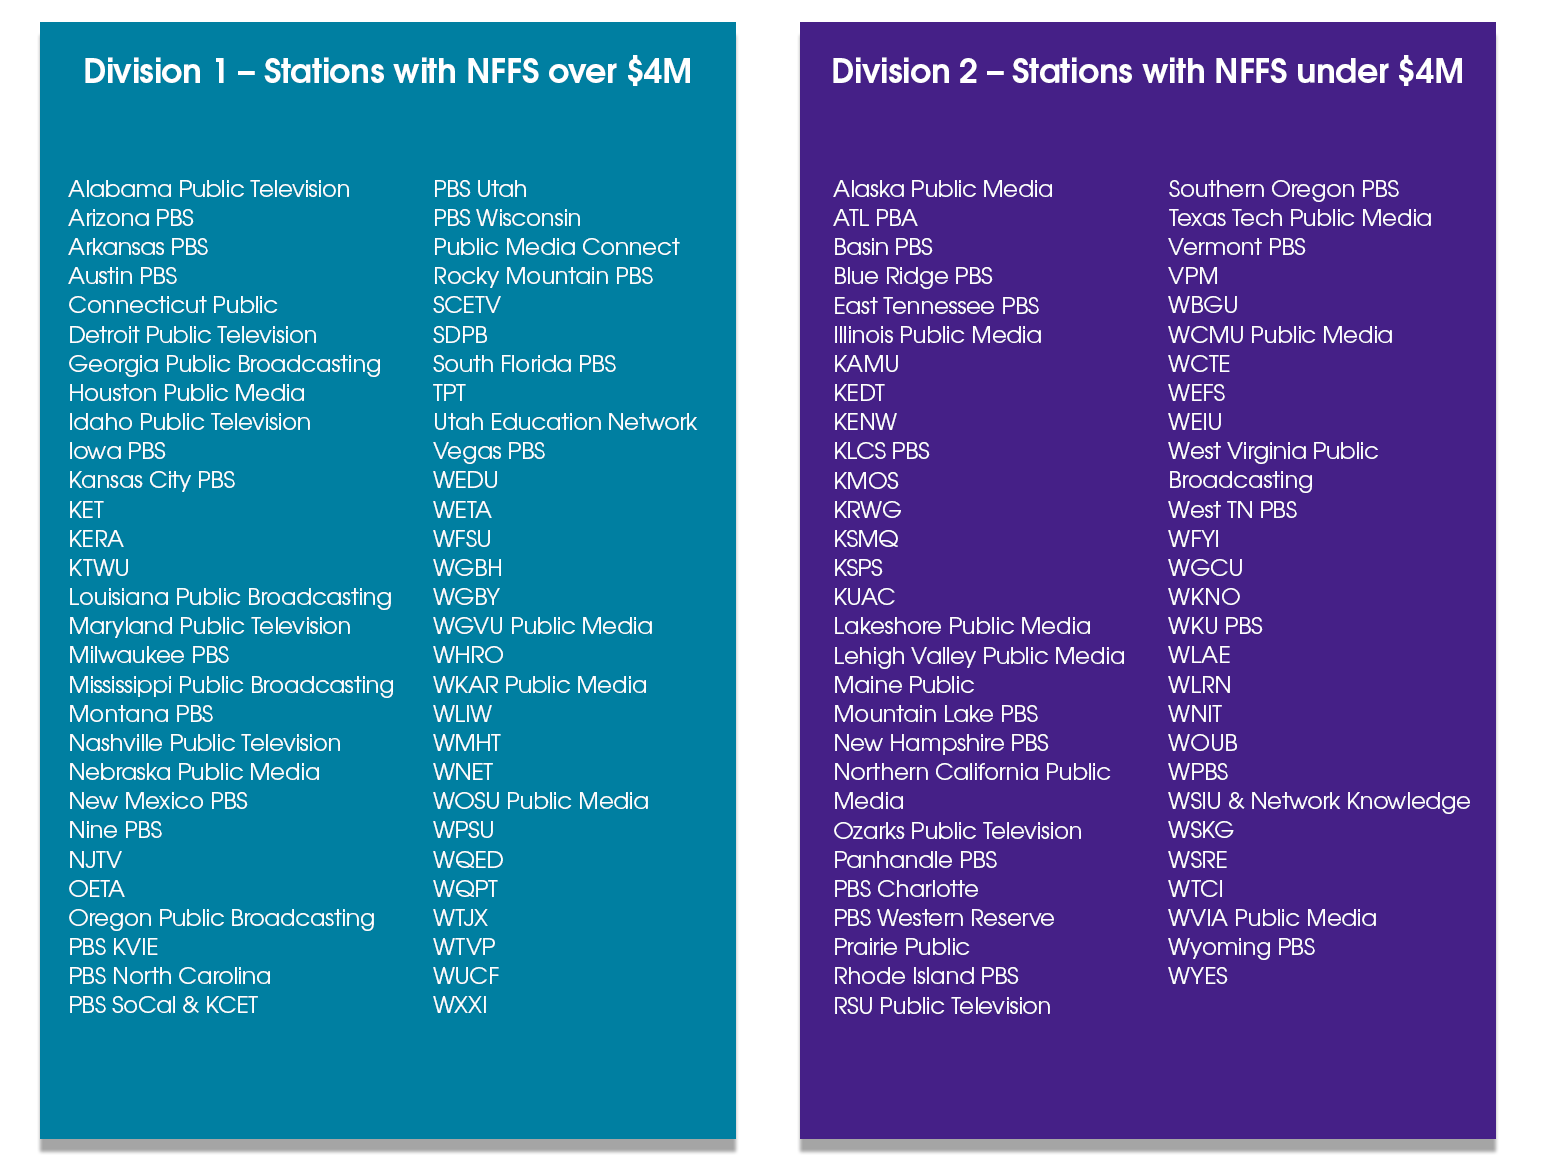 List of station divisions